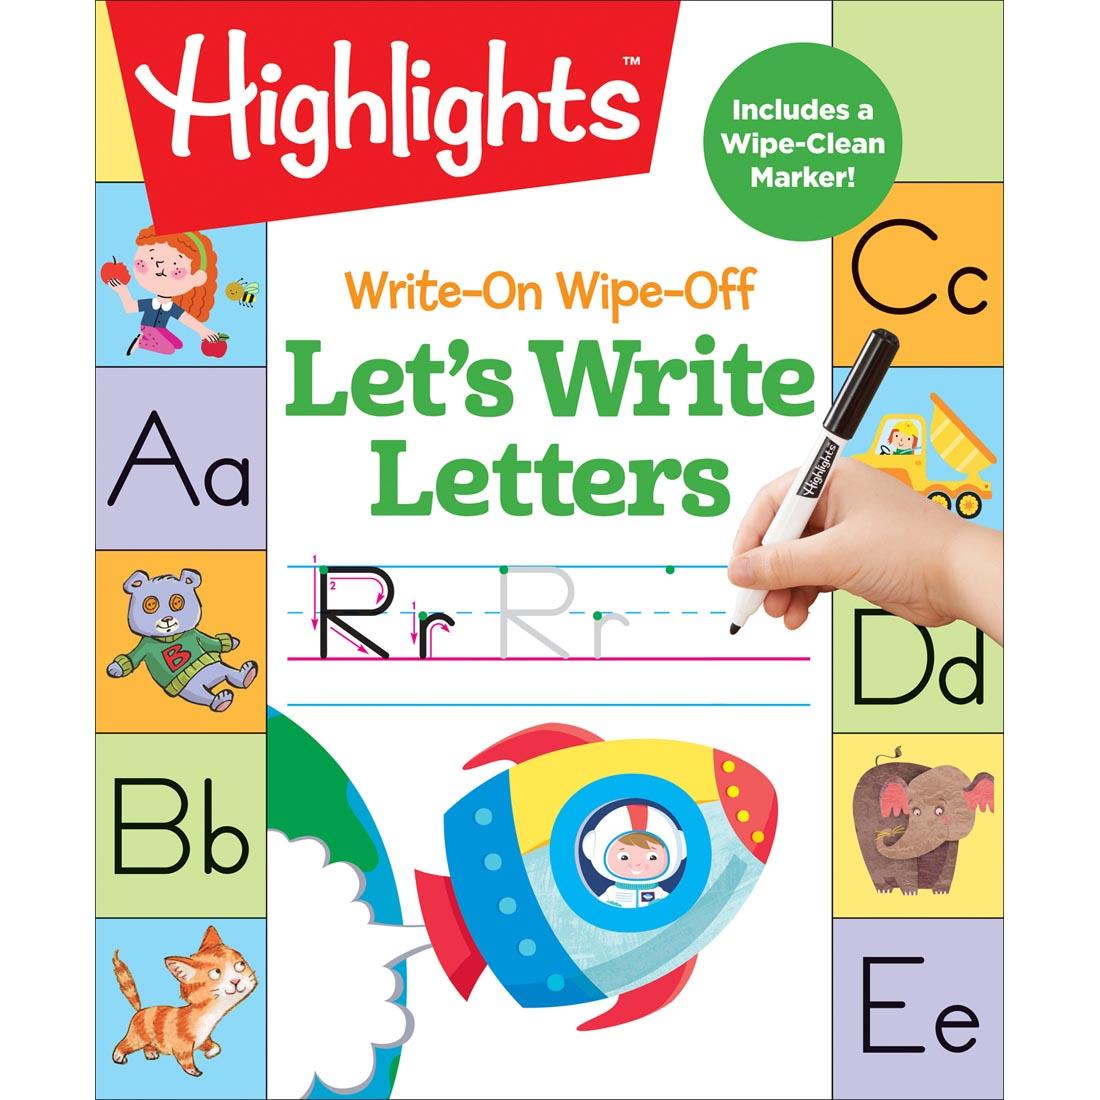 Highlights Let's Write Letters Write-On Wipe-Off Book